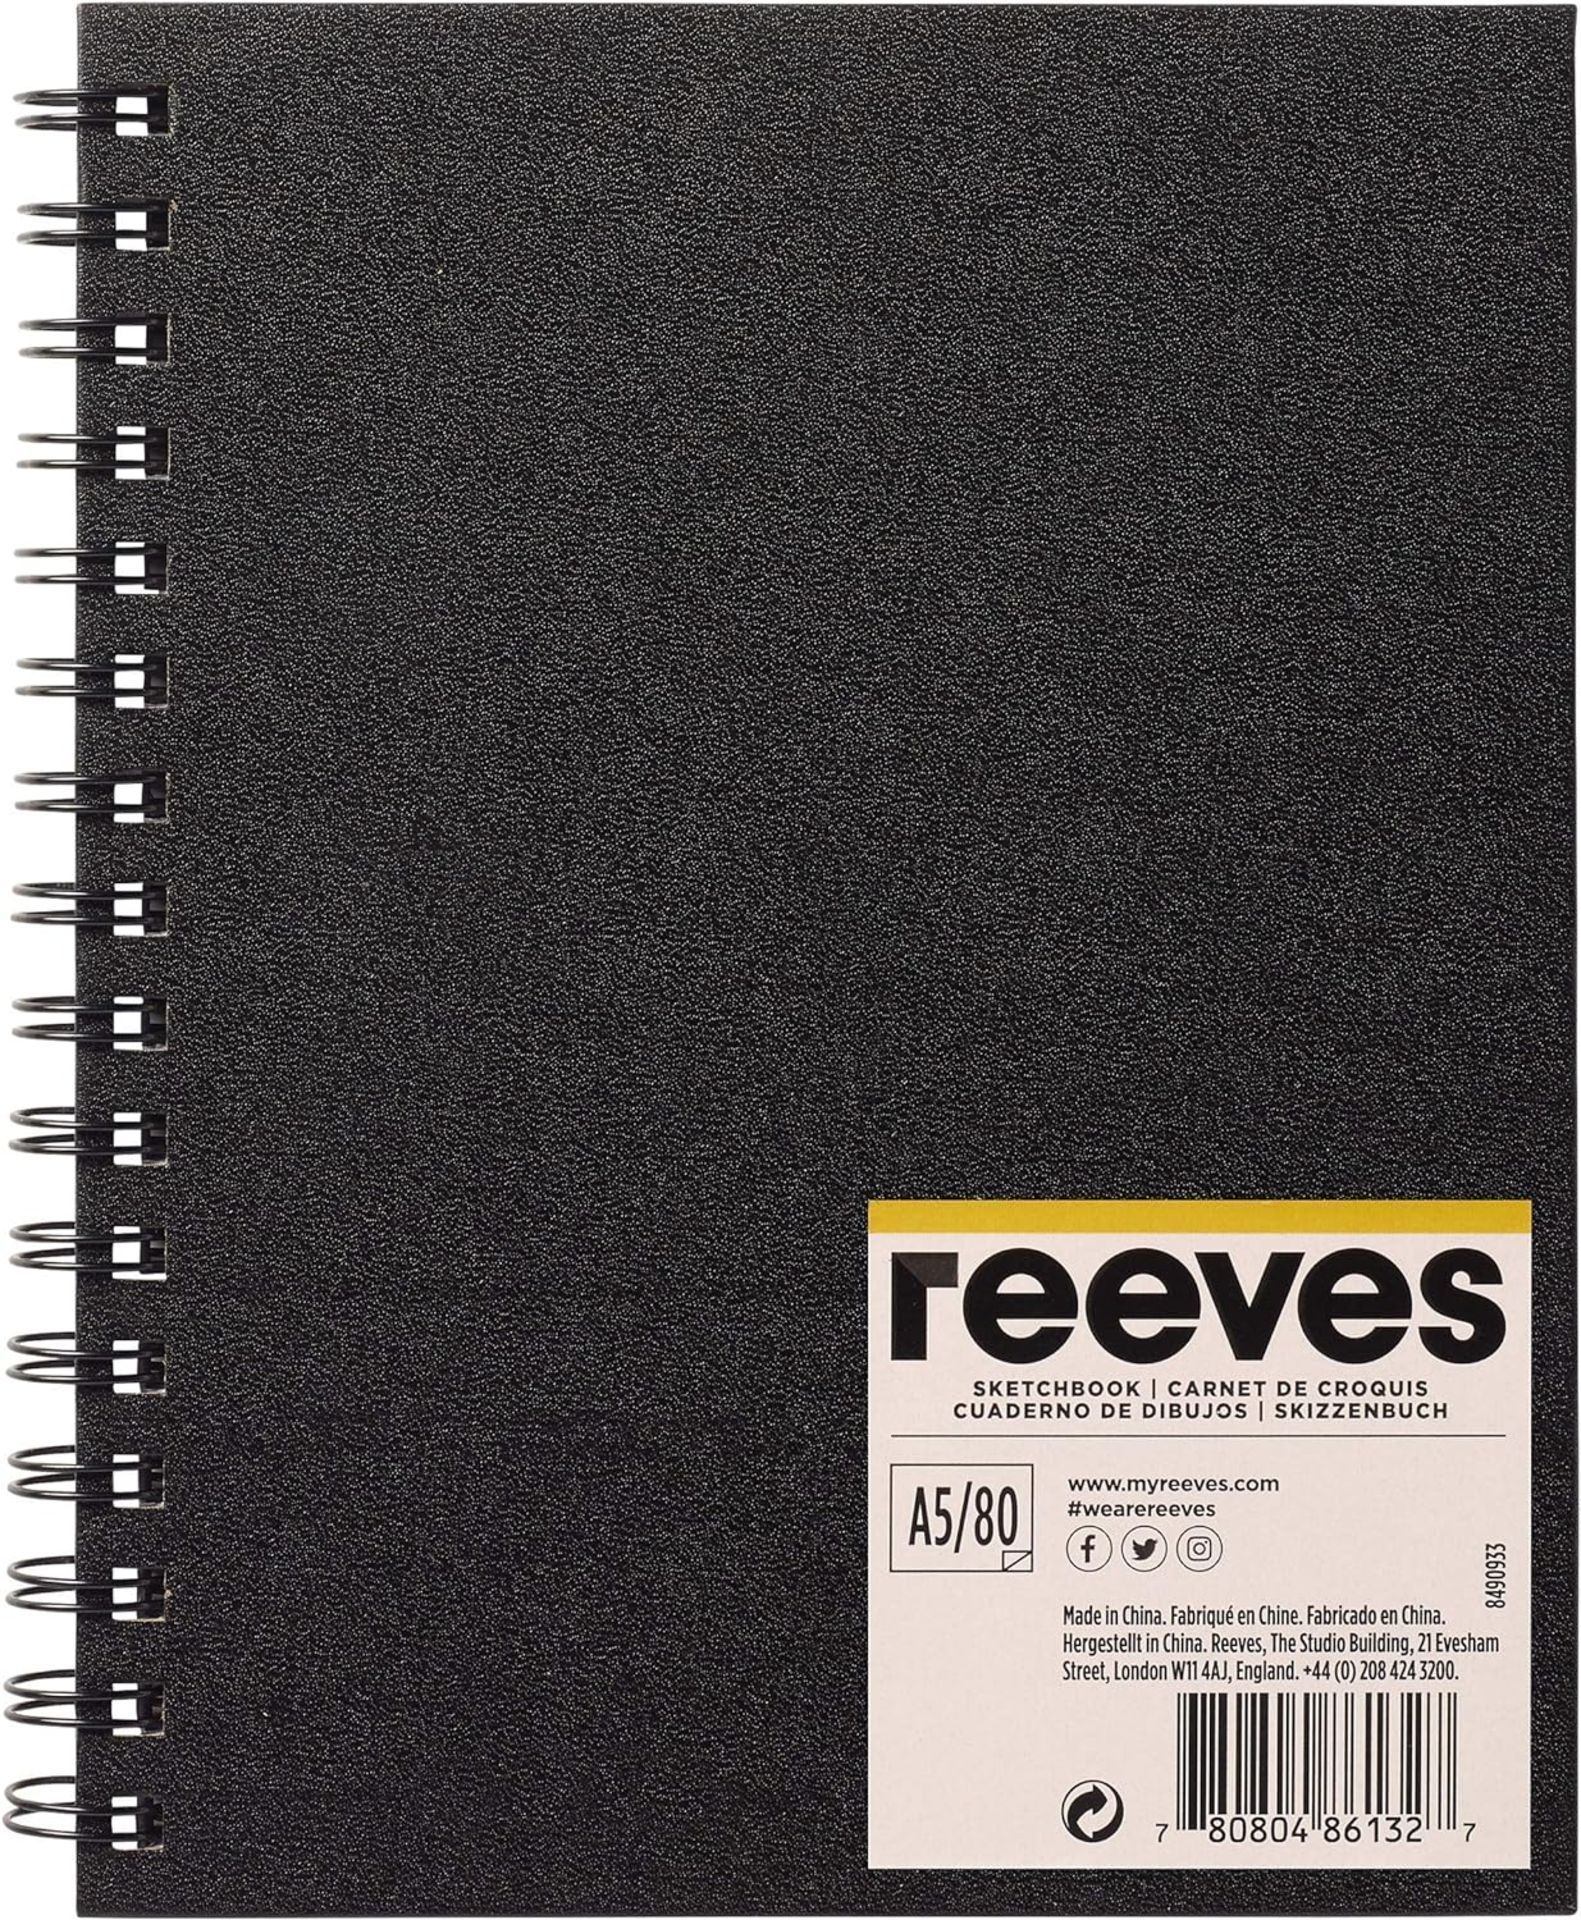 TRADE LOT TO CONTAIN 150x BRAND NEW REEVES Hardback Sketchbook A5 Spiral Bound with 80 Pages. RRP £ - Image 2 of 2